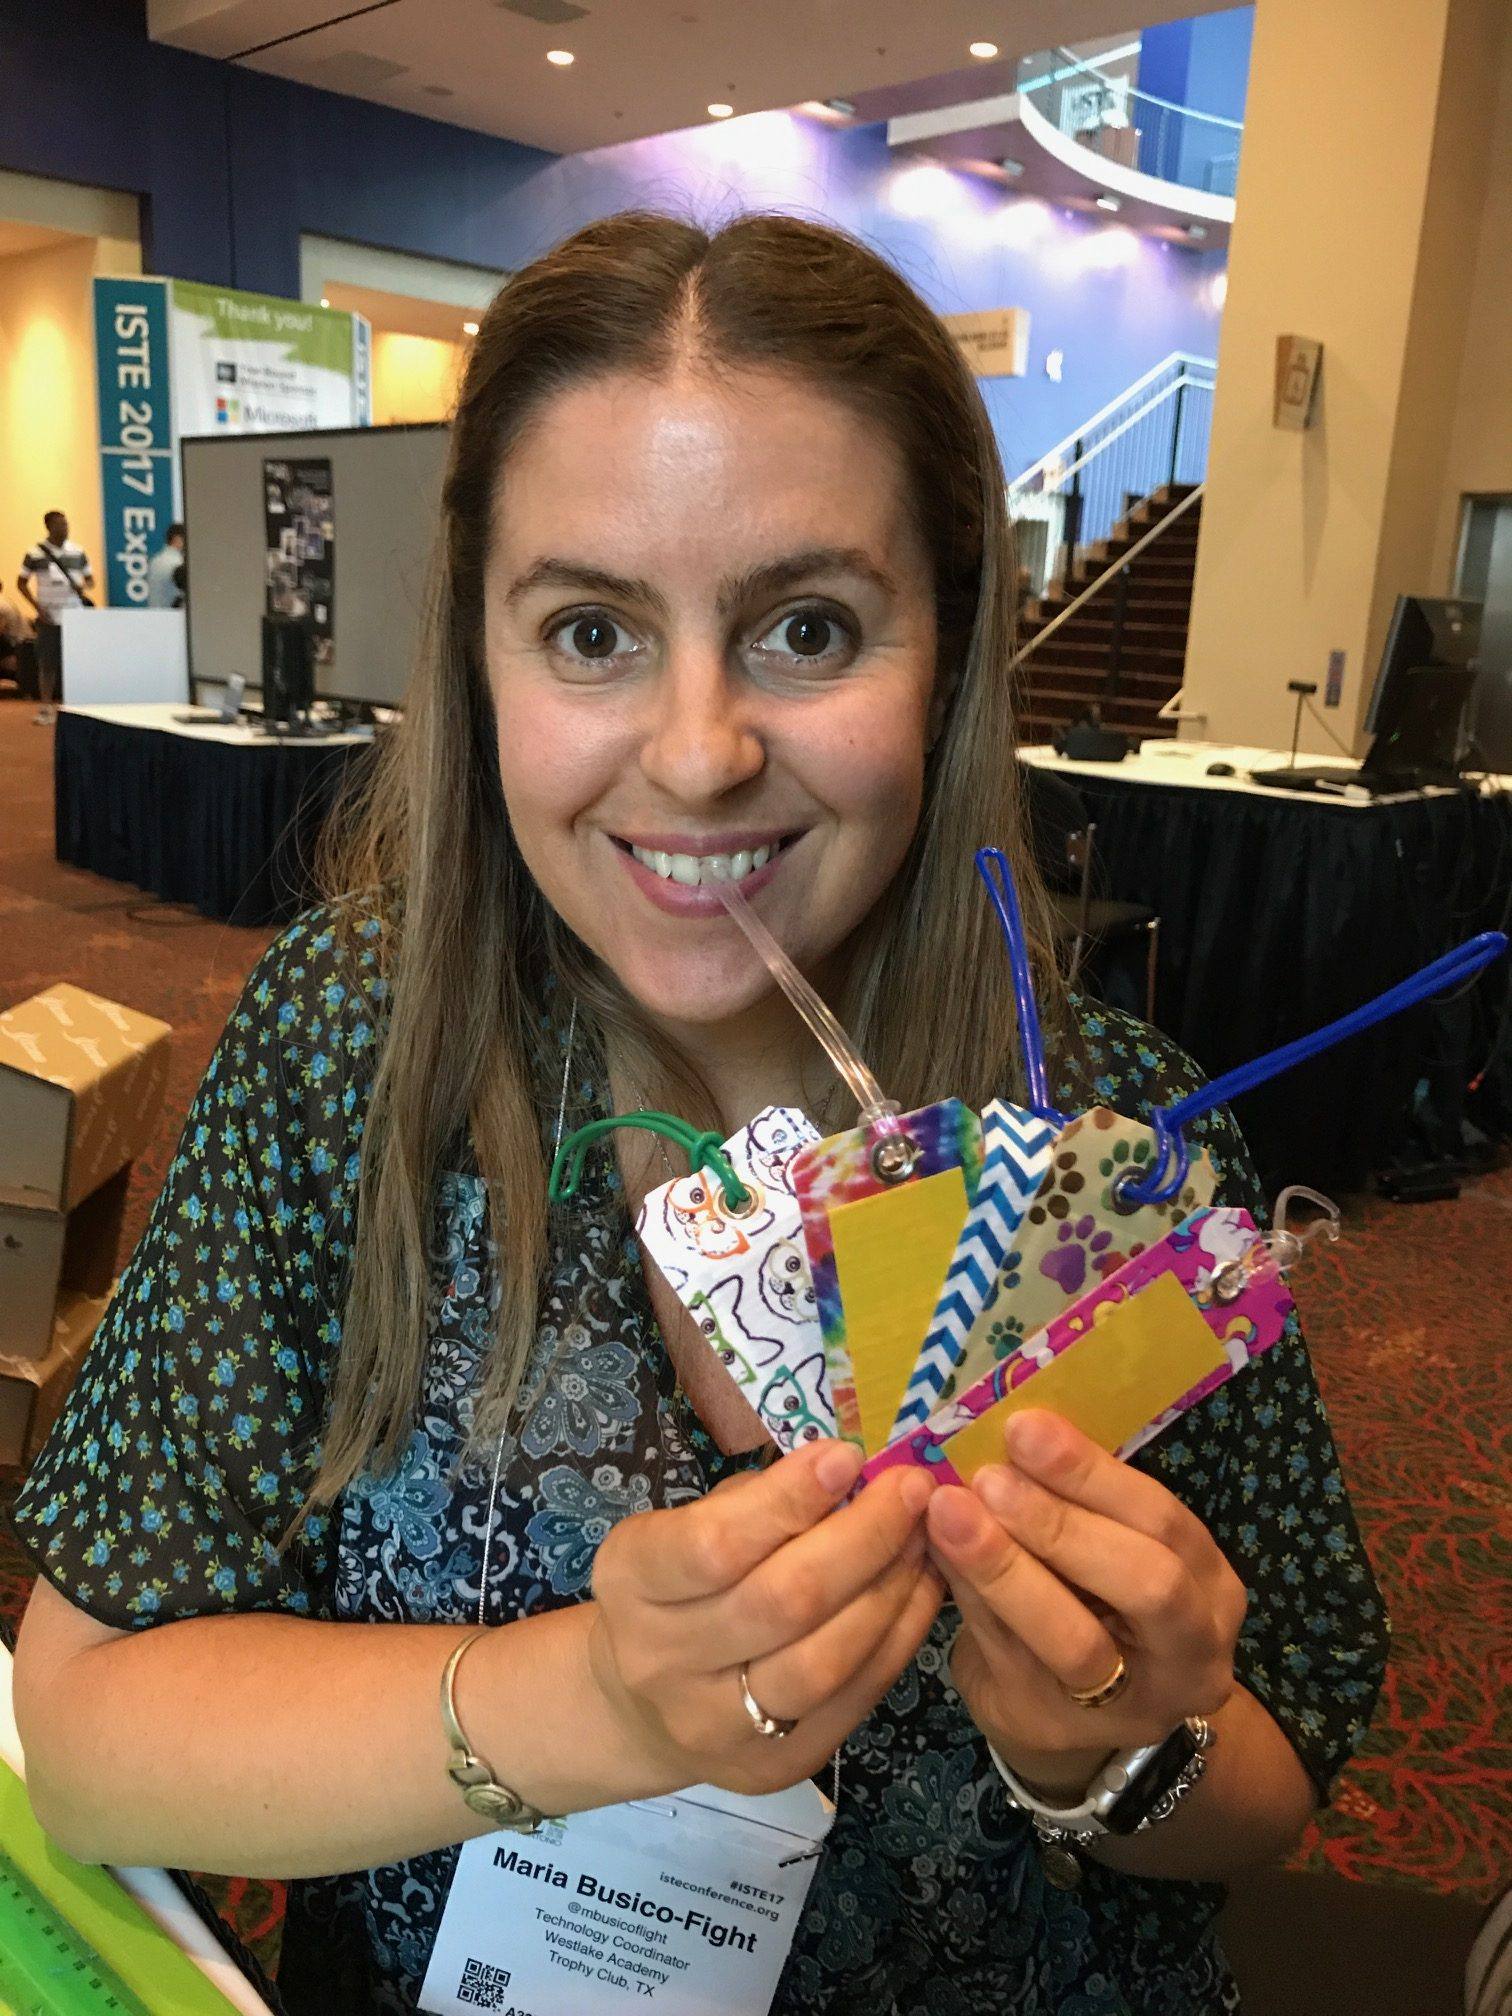 Maria holding up several duct tape luggage tags at  the convention.